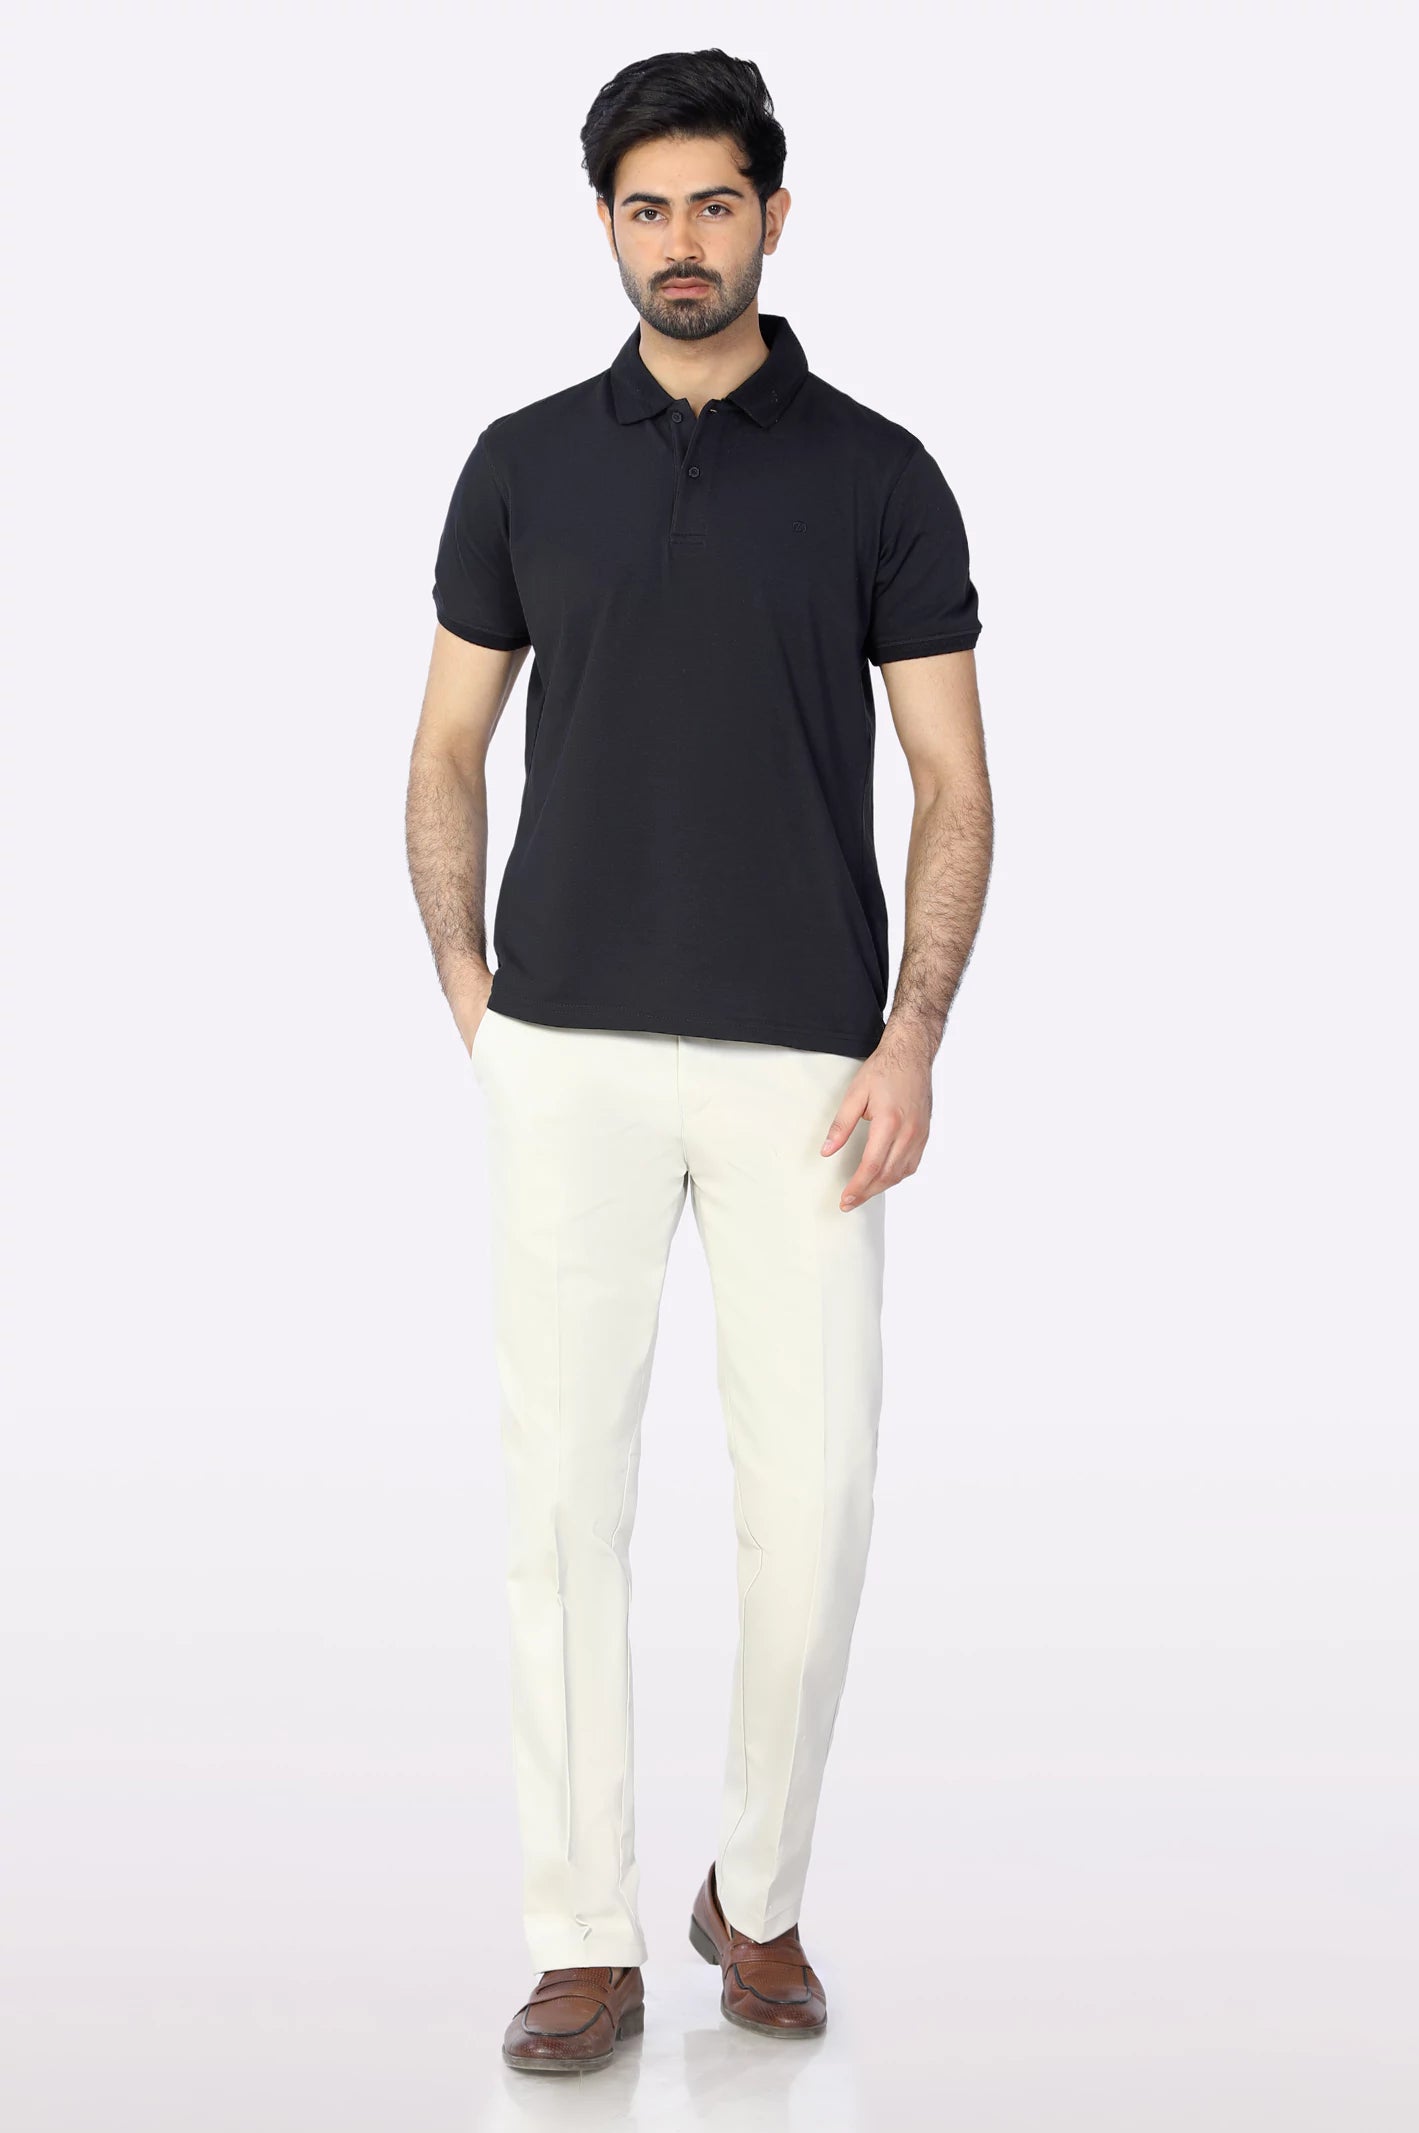 Black Basic Polo From Diners